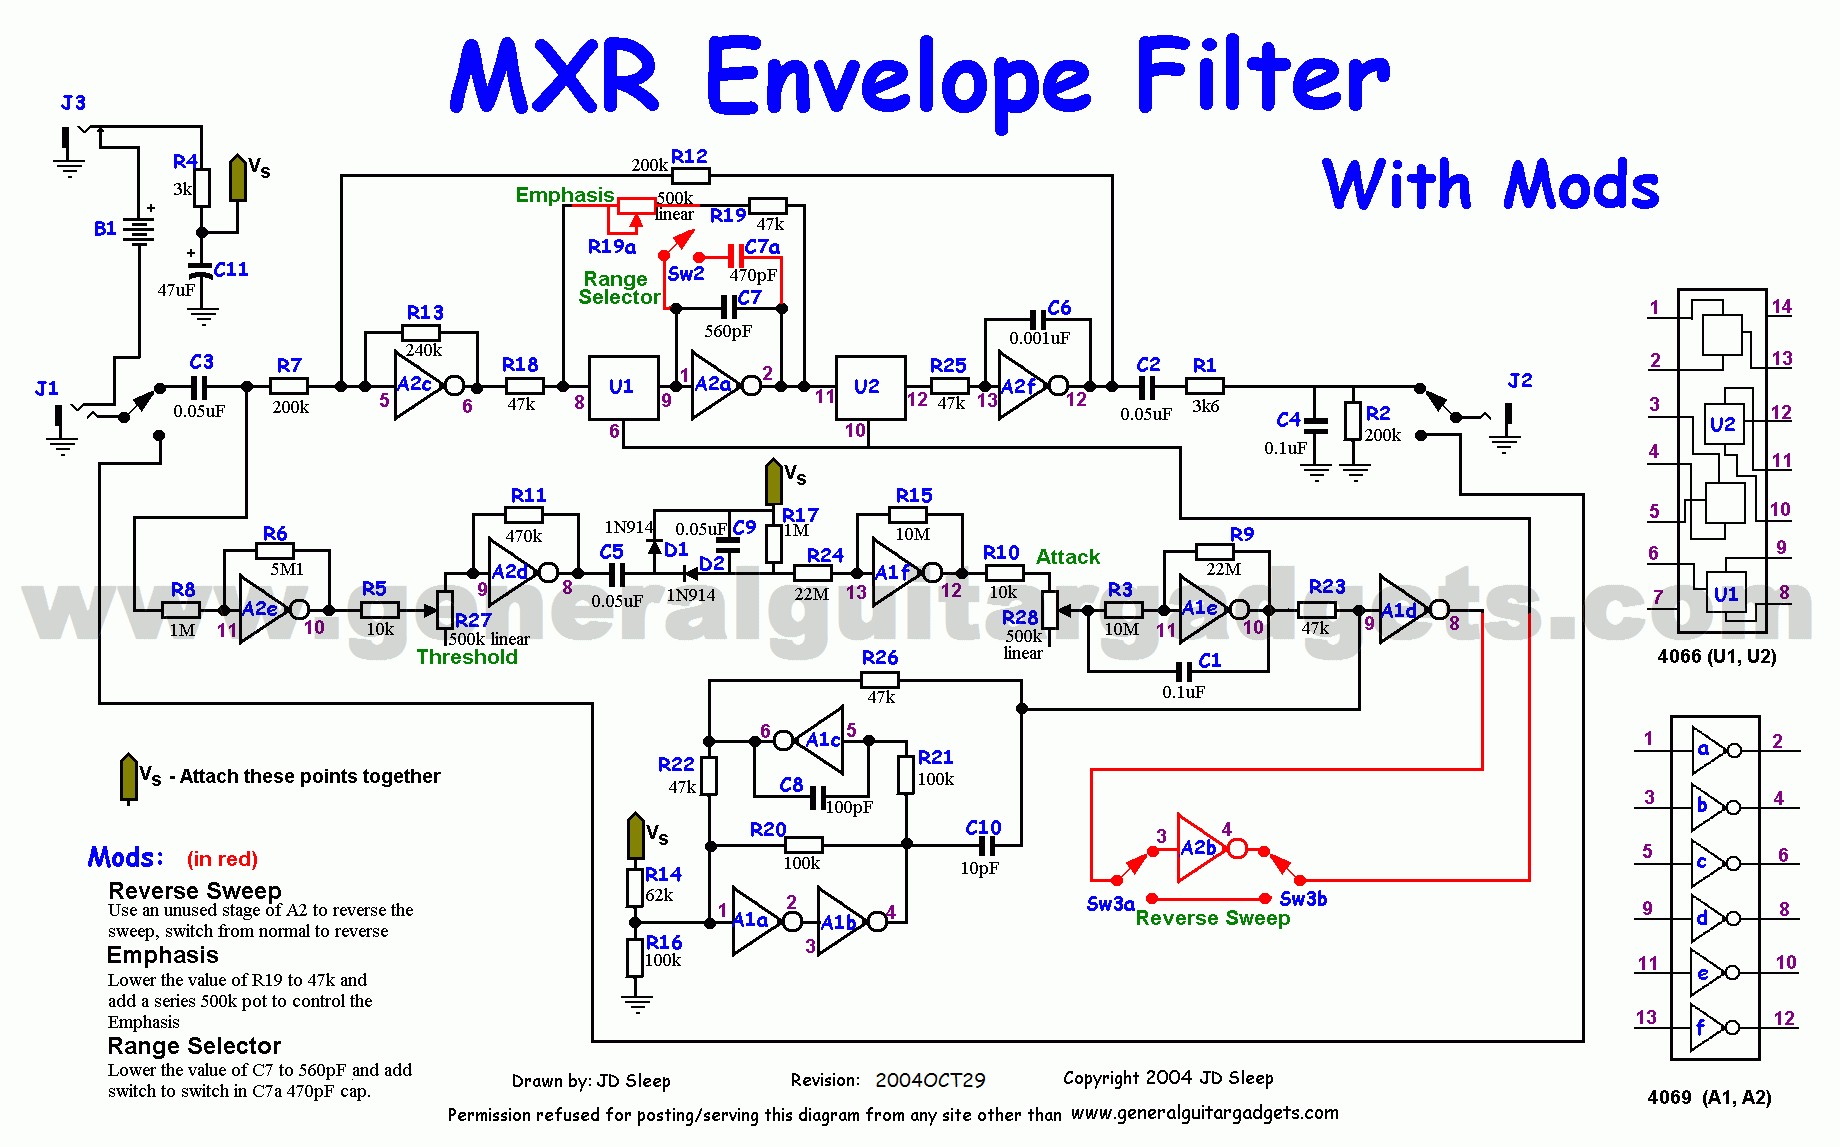 MXR Envelope Filter with modifications